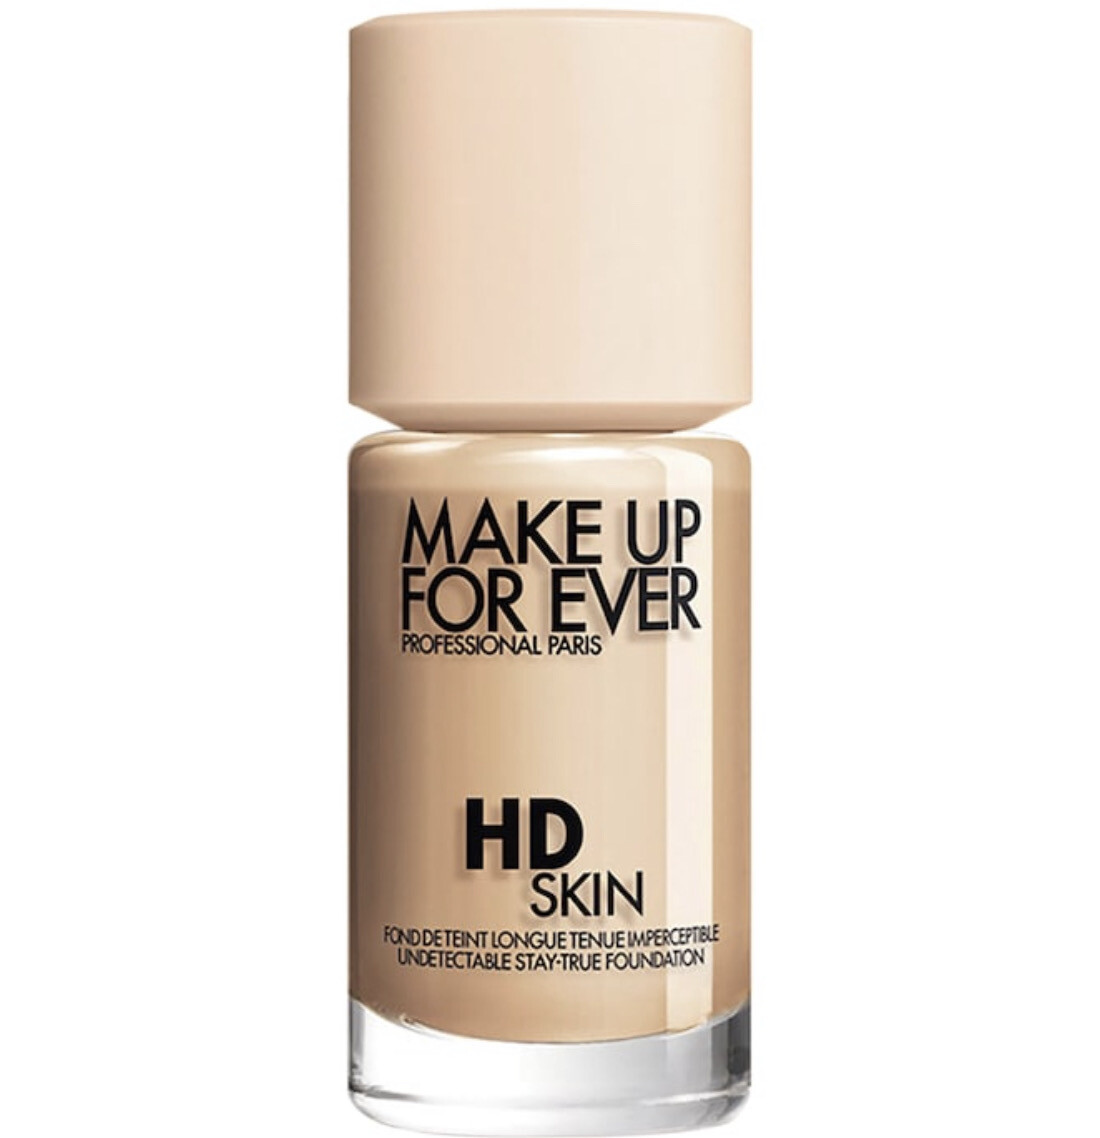 Make Up For Ever - HD Skin Undetectable Longwear Foundation | 1Y16 Warm Beige - for light skin tones with yellow undertones